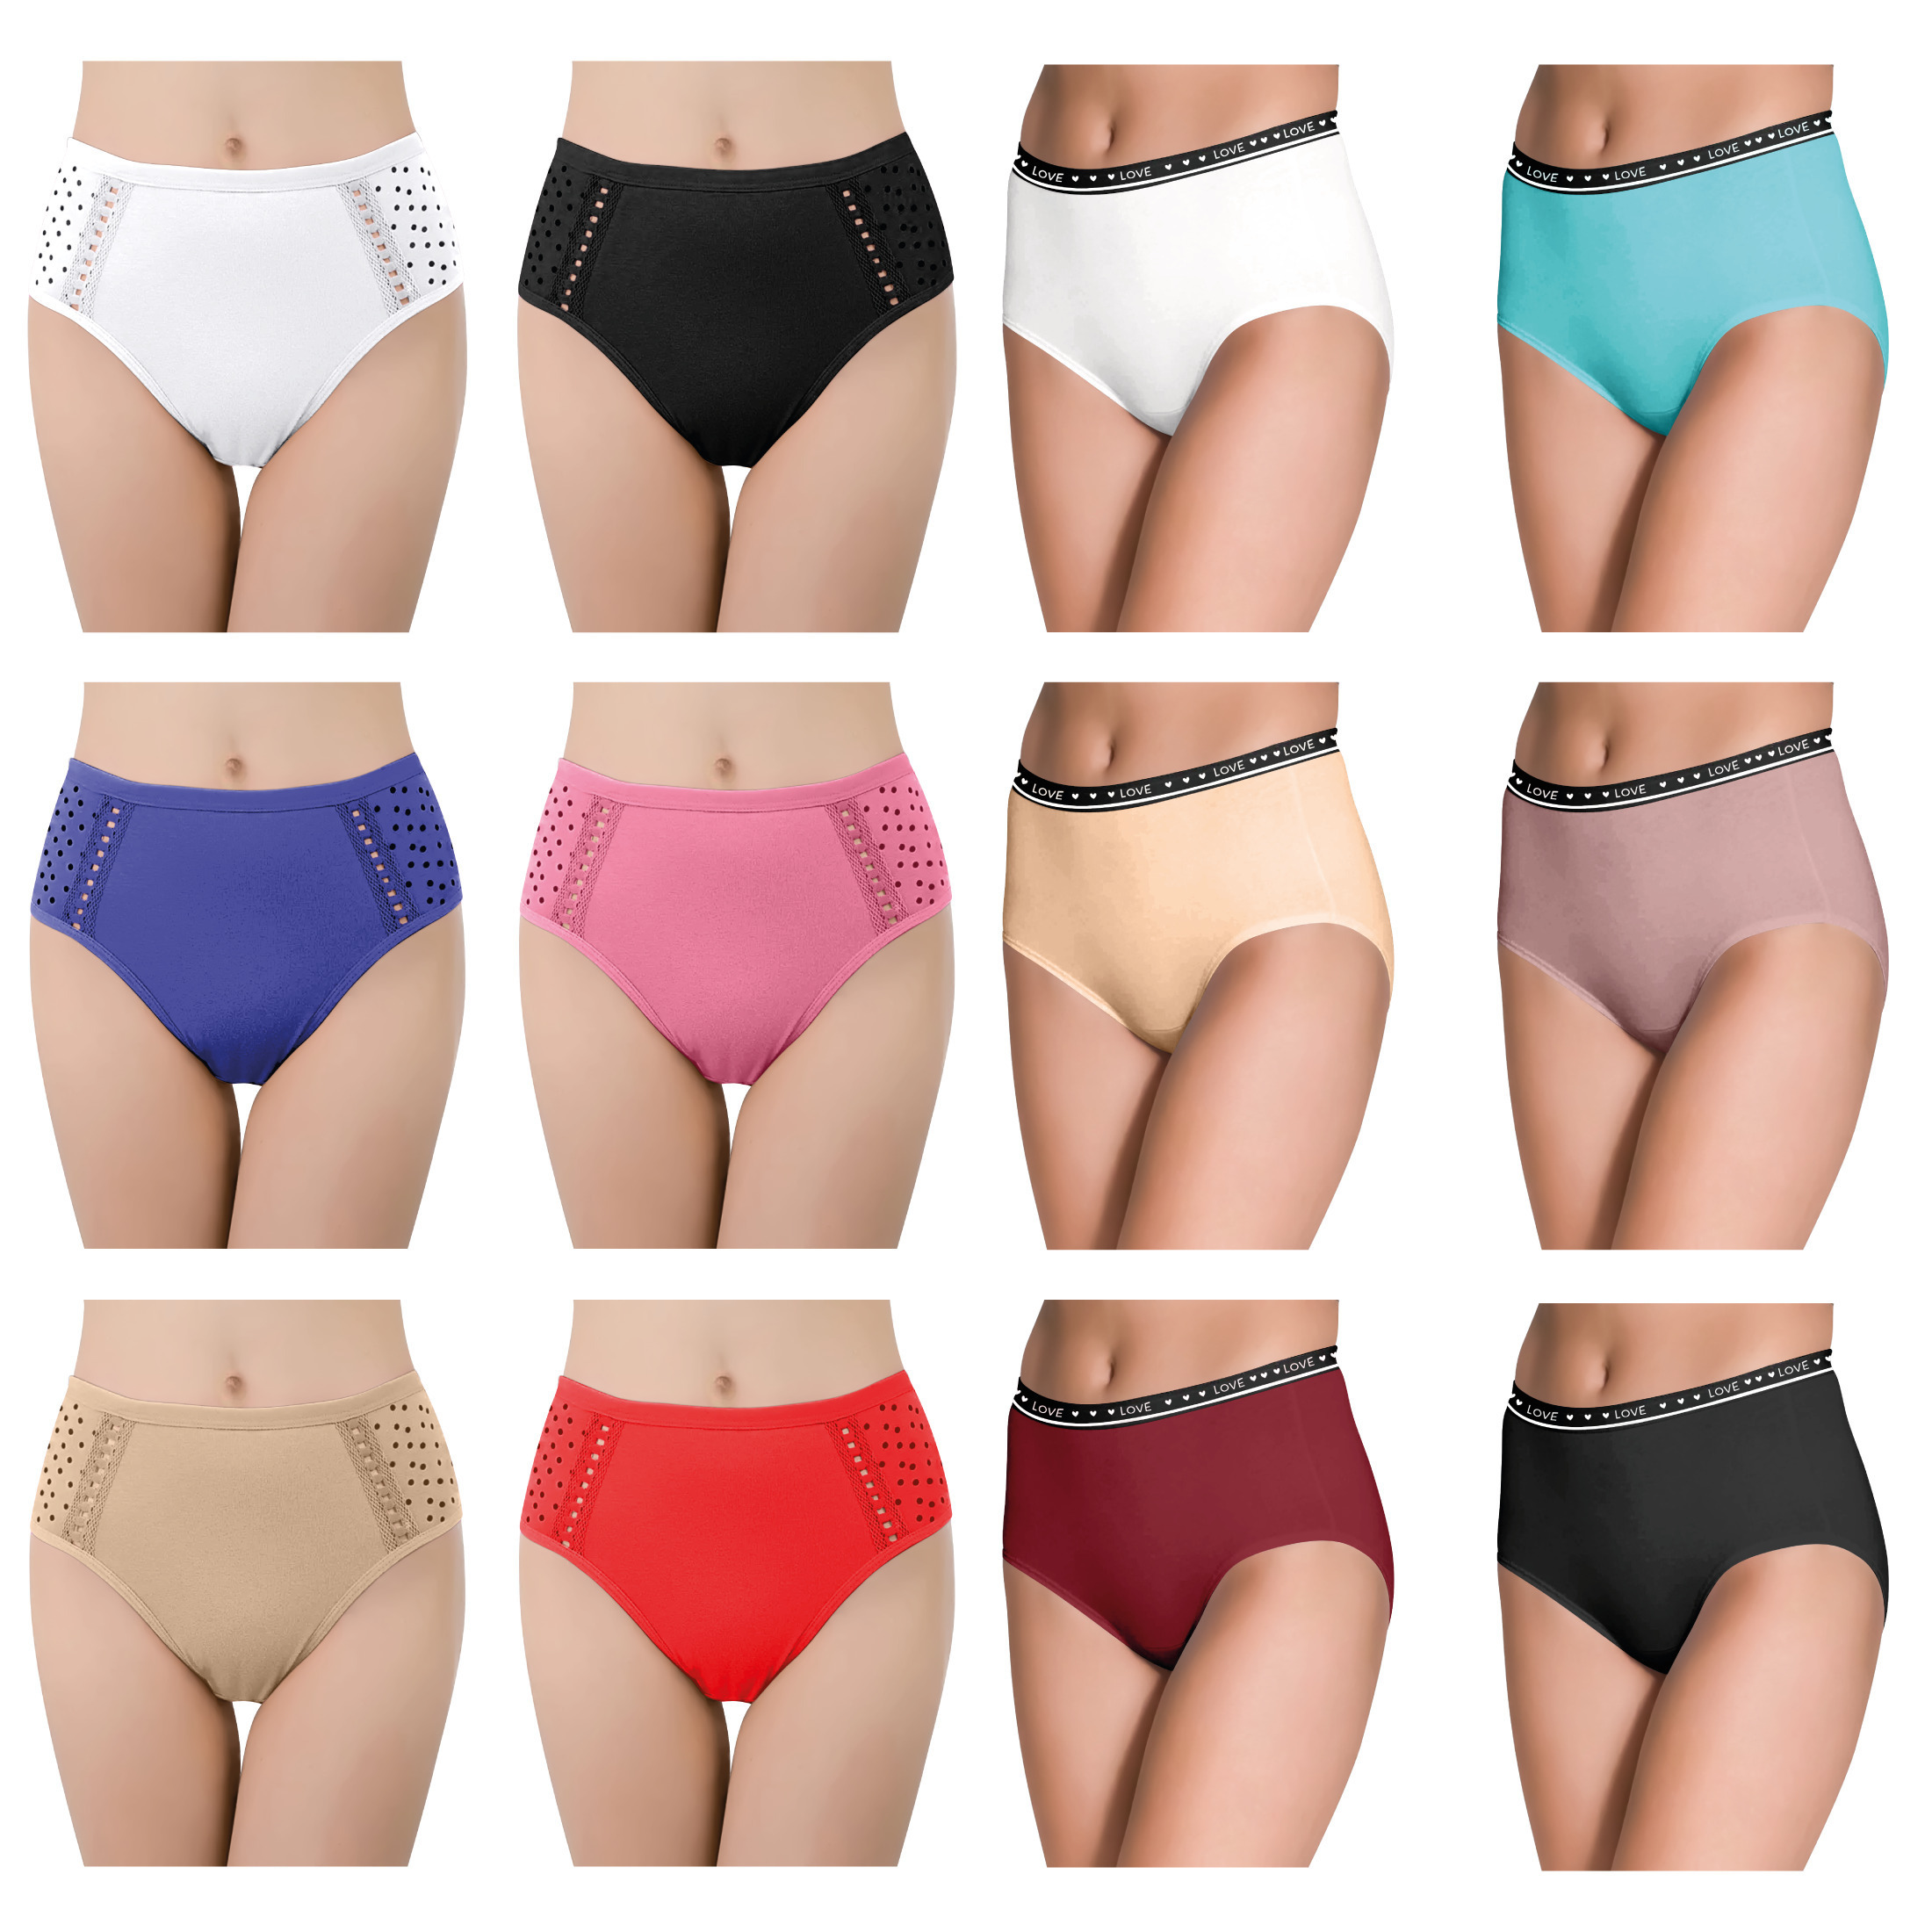 6-Pack: Women's Ultra Soft Moisture Wicking Panties Cotton Perfect Fit Underwear (Plus Sizes Available ) - Small